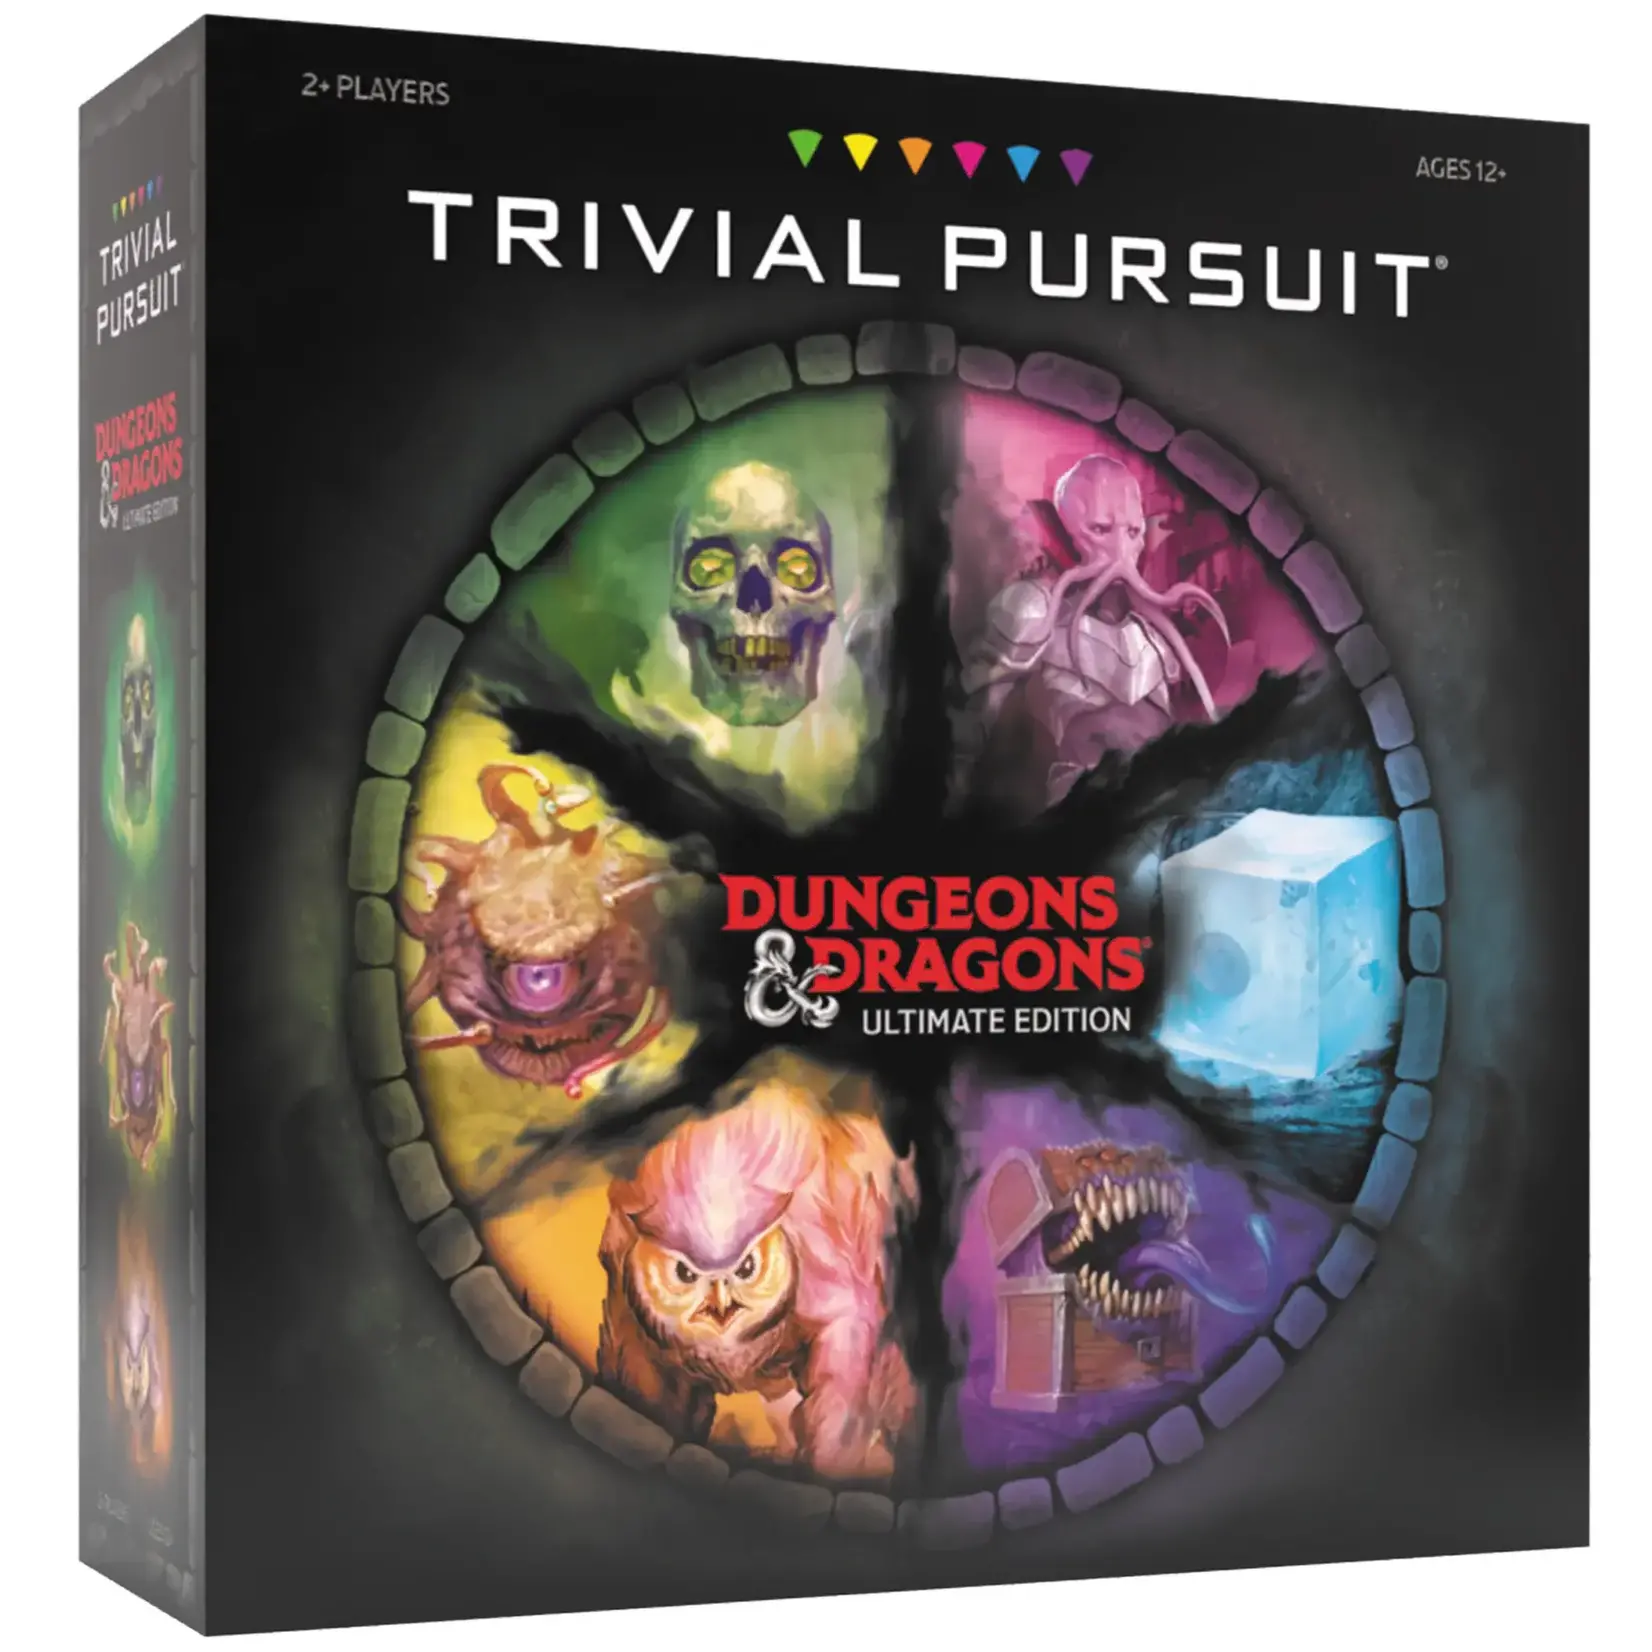 Usaopoly Trivial Pursuit: Dungeons & Dragons Ultimate